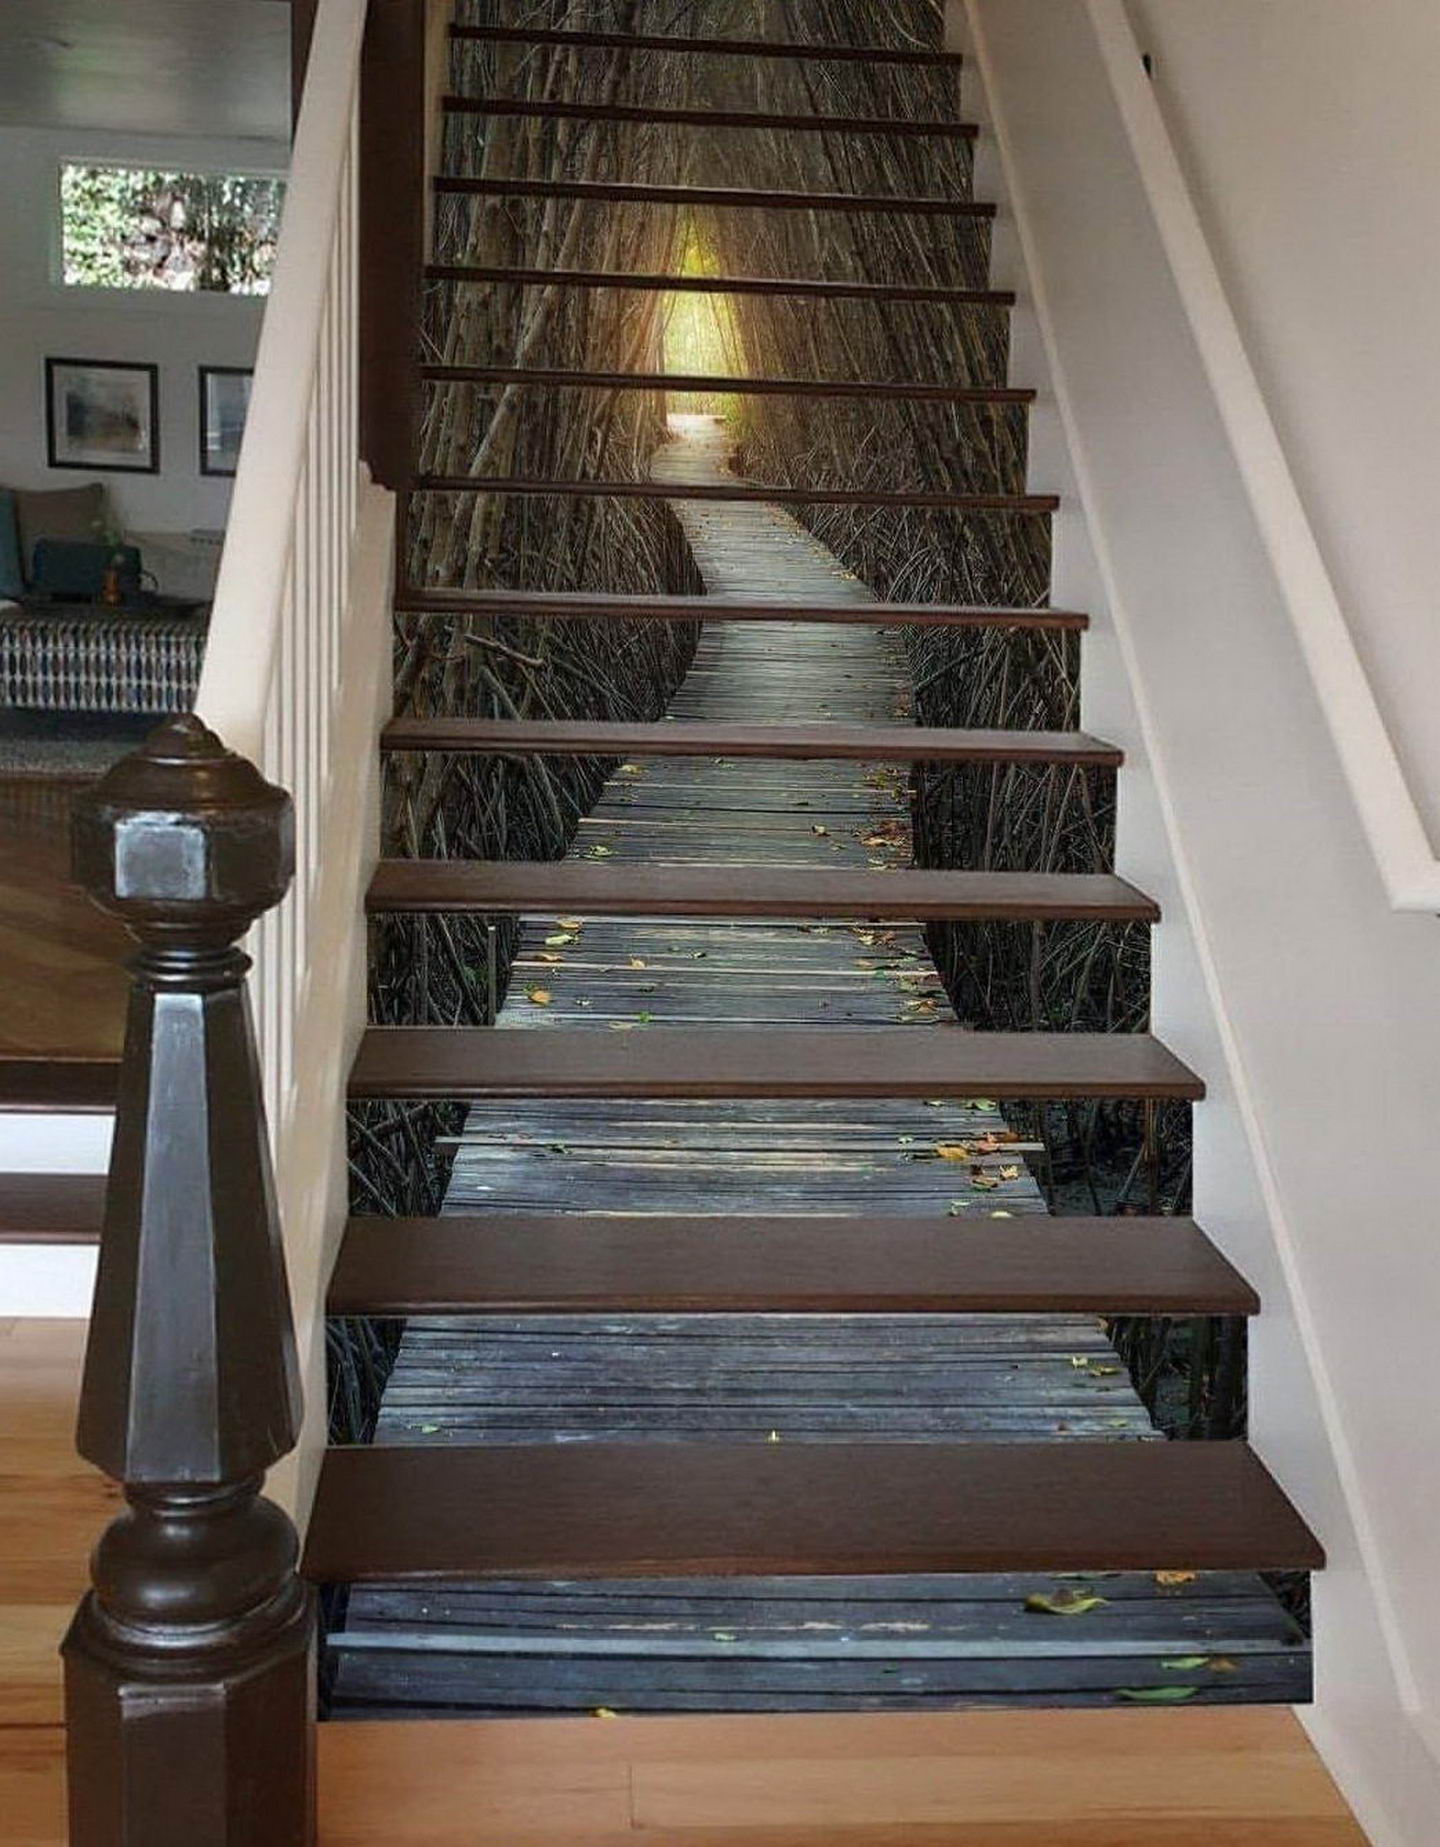 cool pic of a staircase painted like a magical pathway